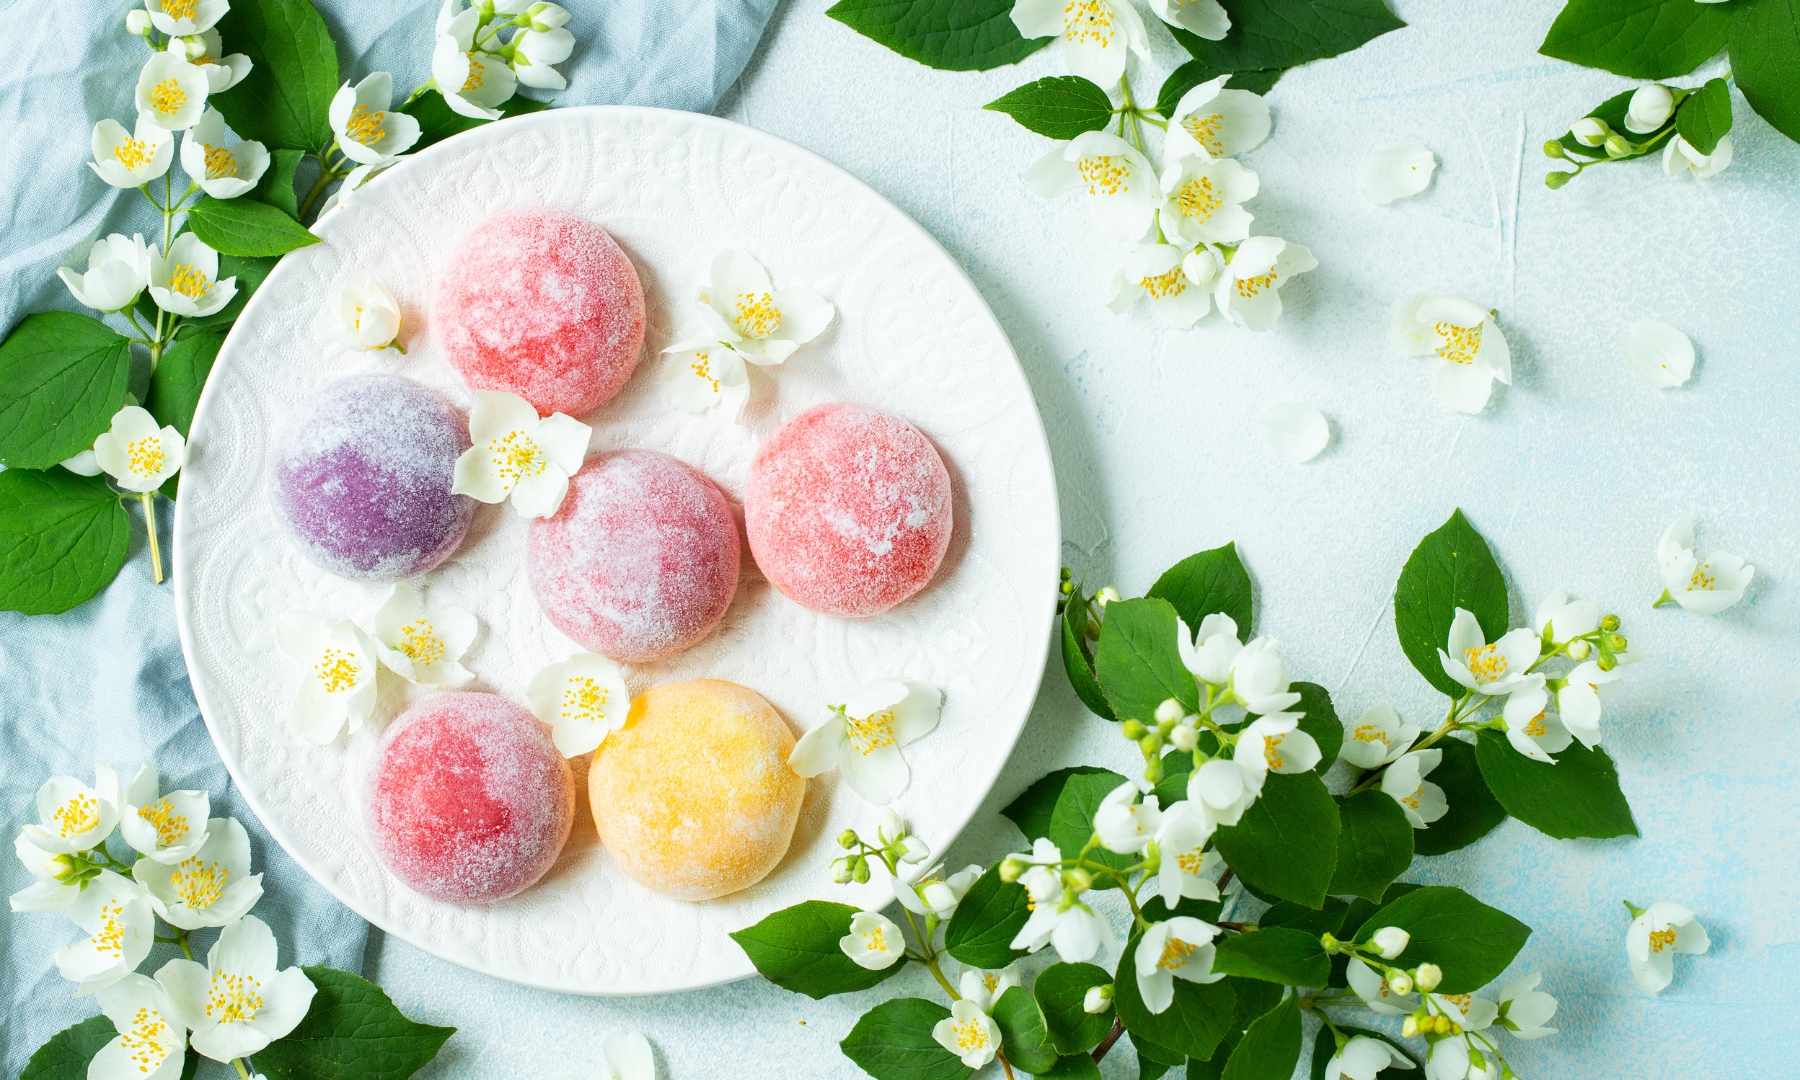 Mochi - the most well known Japanese dessert